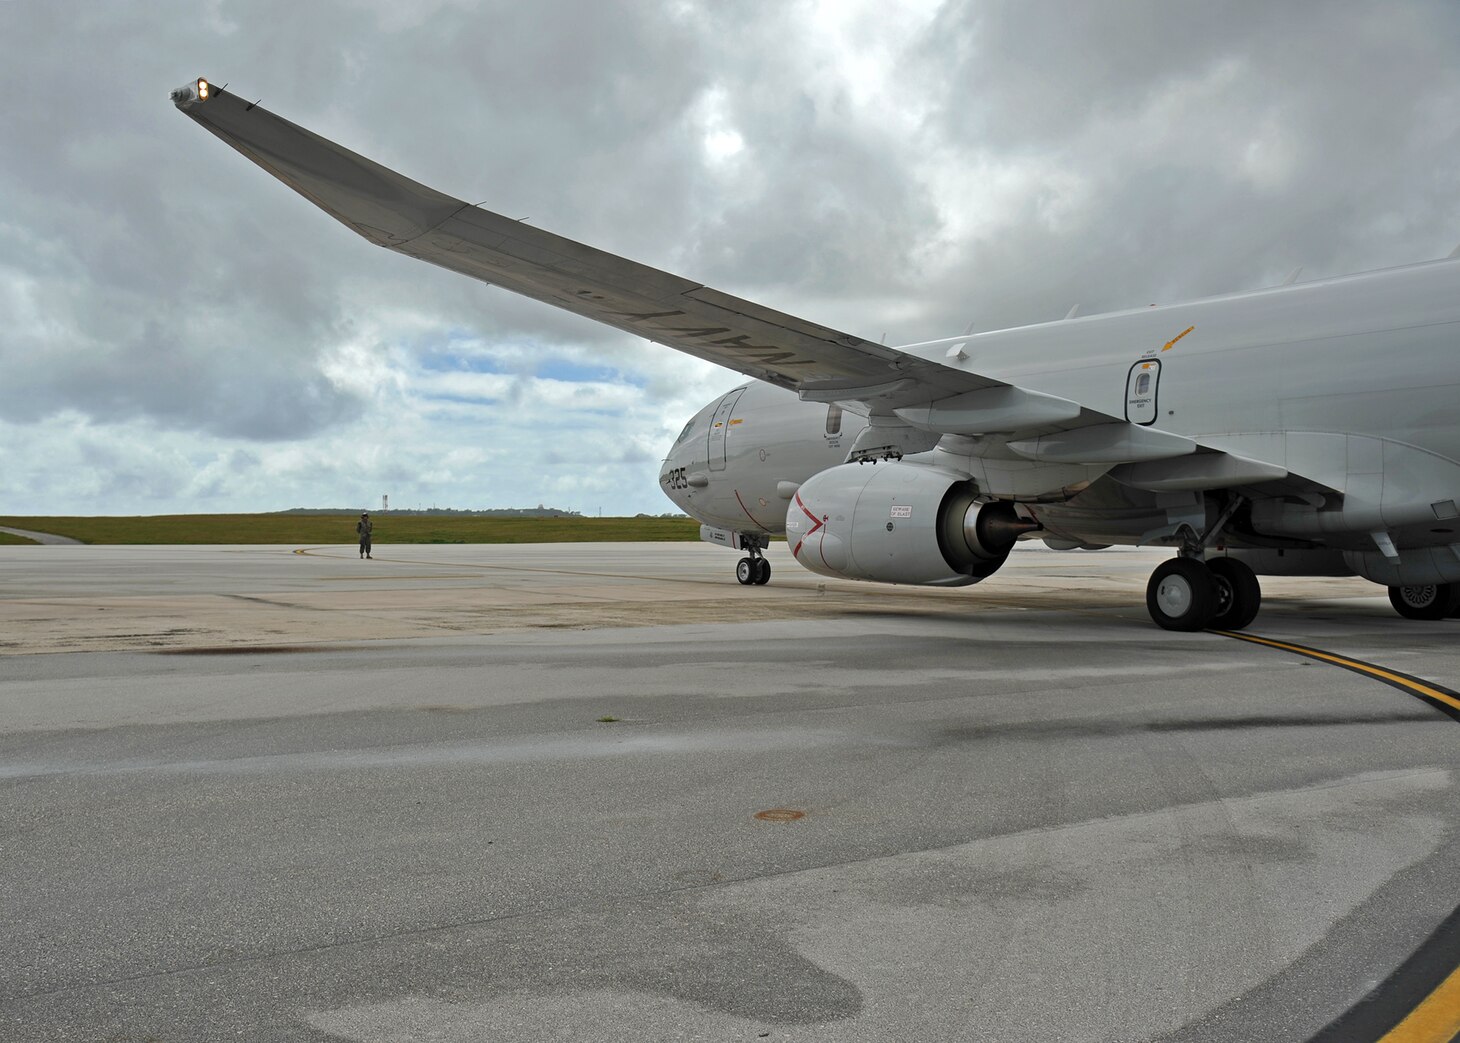 Airman Joseph Harding, assigned to the "Golden Swordsmen" of Patrol Squadron (VP) 47, guides a VP-47 P-8A Poseidon to park following flight operations. Exercise Sea Dragon is an annual, multilateral exercise that stresses coordinated anti-submarine warfare prosecution against both simulated and live targets.